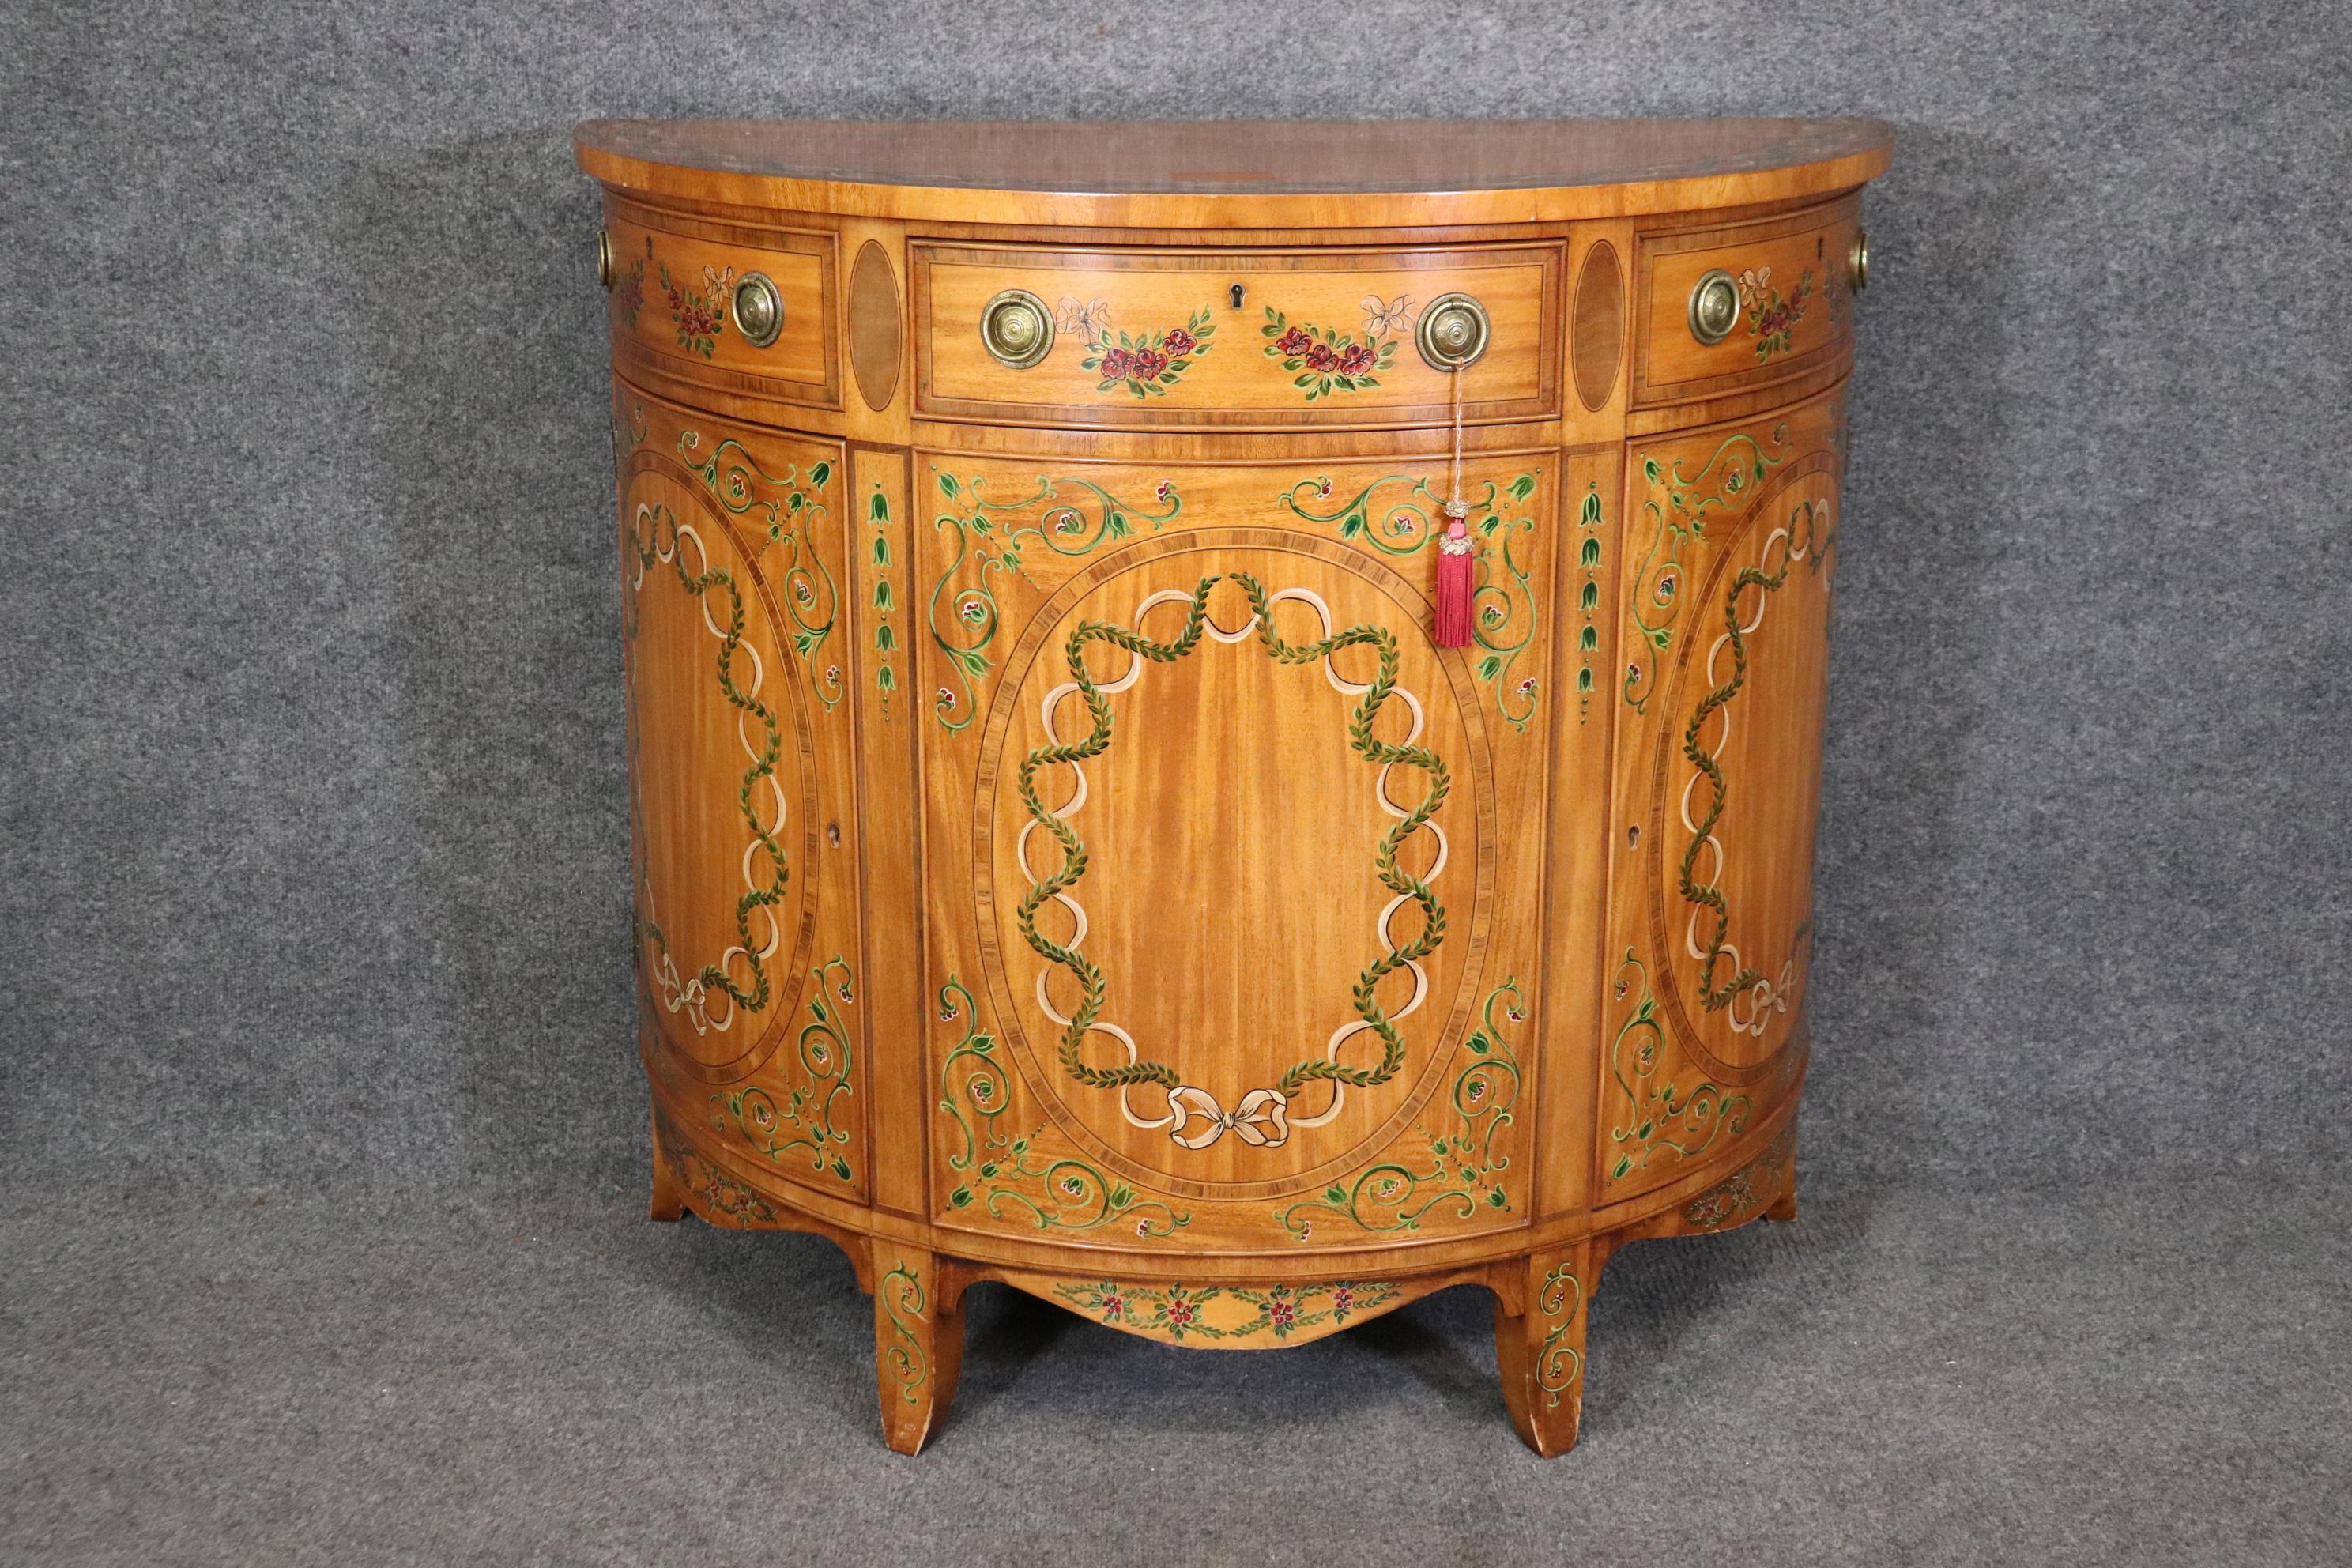 This is a charming Wellington Hall Adams style paint Decorated commode or nightstand. The stand is in good condition with minor signs of use and wear as its not old. The commode meaures 34.75 tall x 38 wide x 19.5 tall and dates to teh 2000-2010